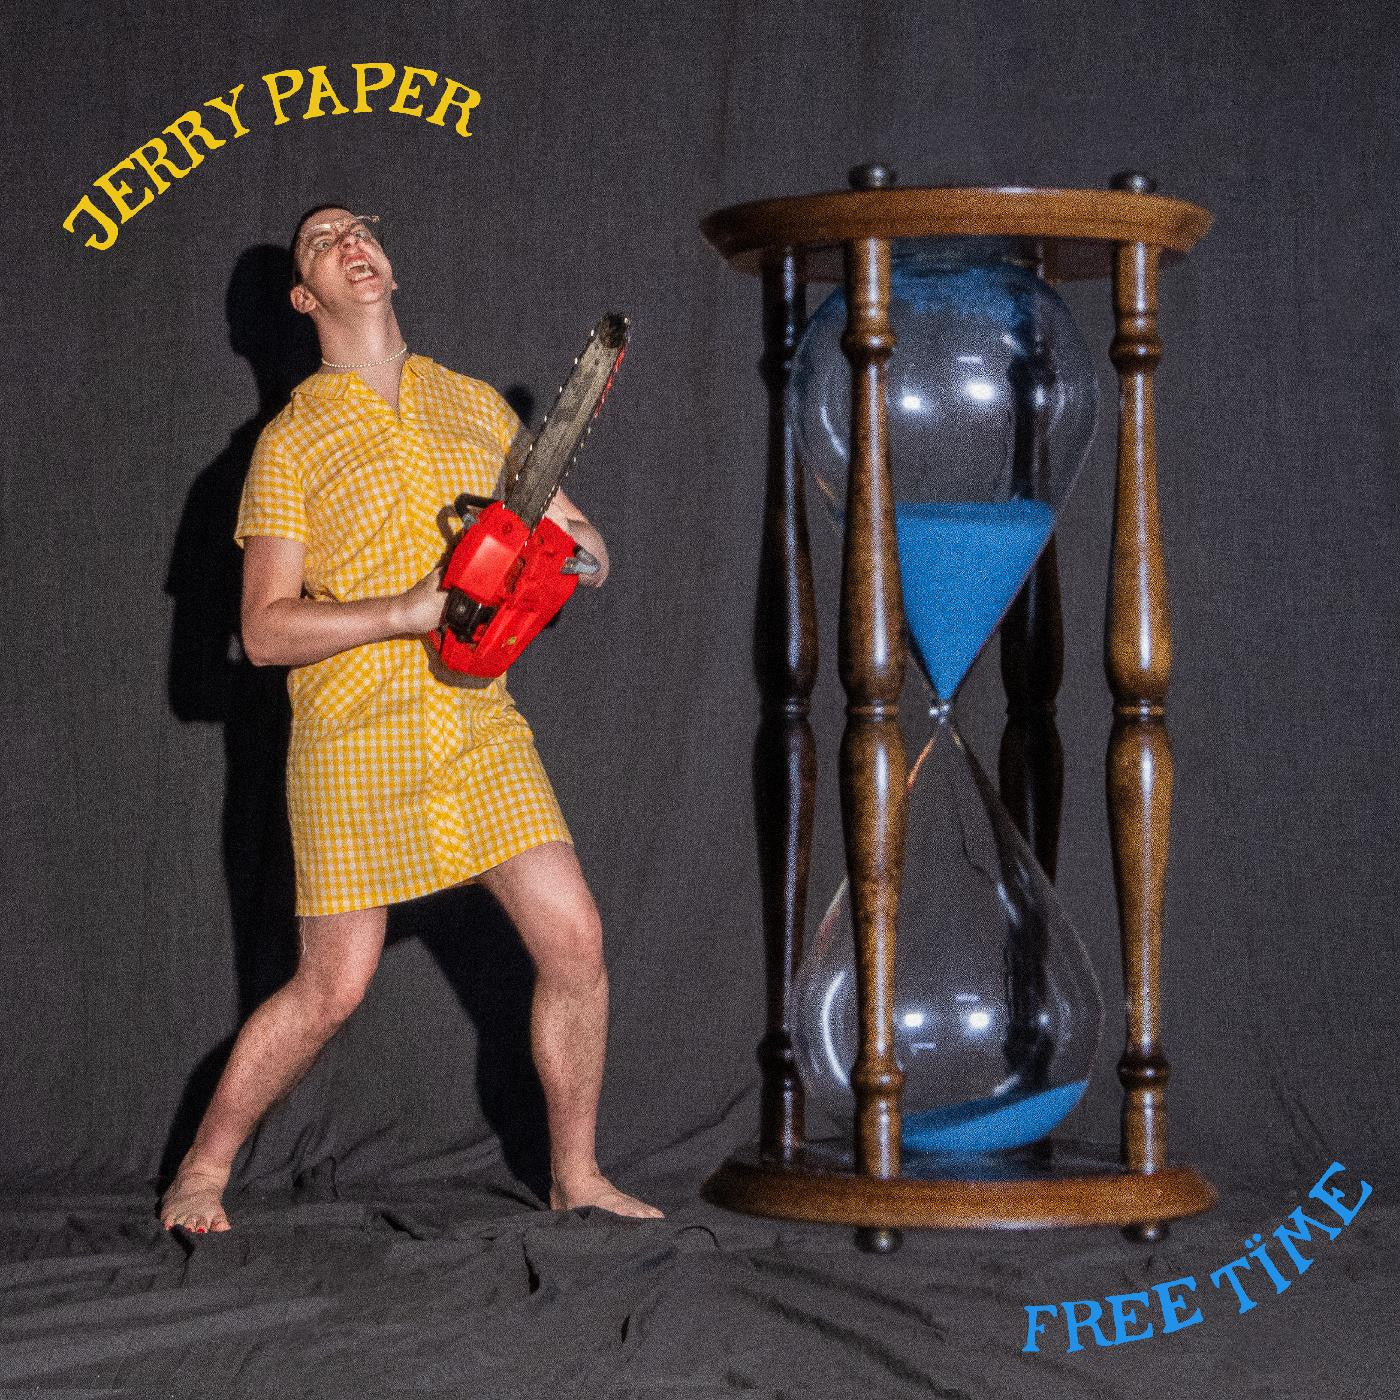 JERRY PAPER - FREE TIME (Colored Vinyl) LP